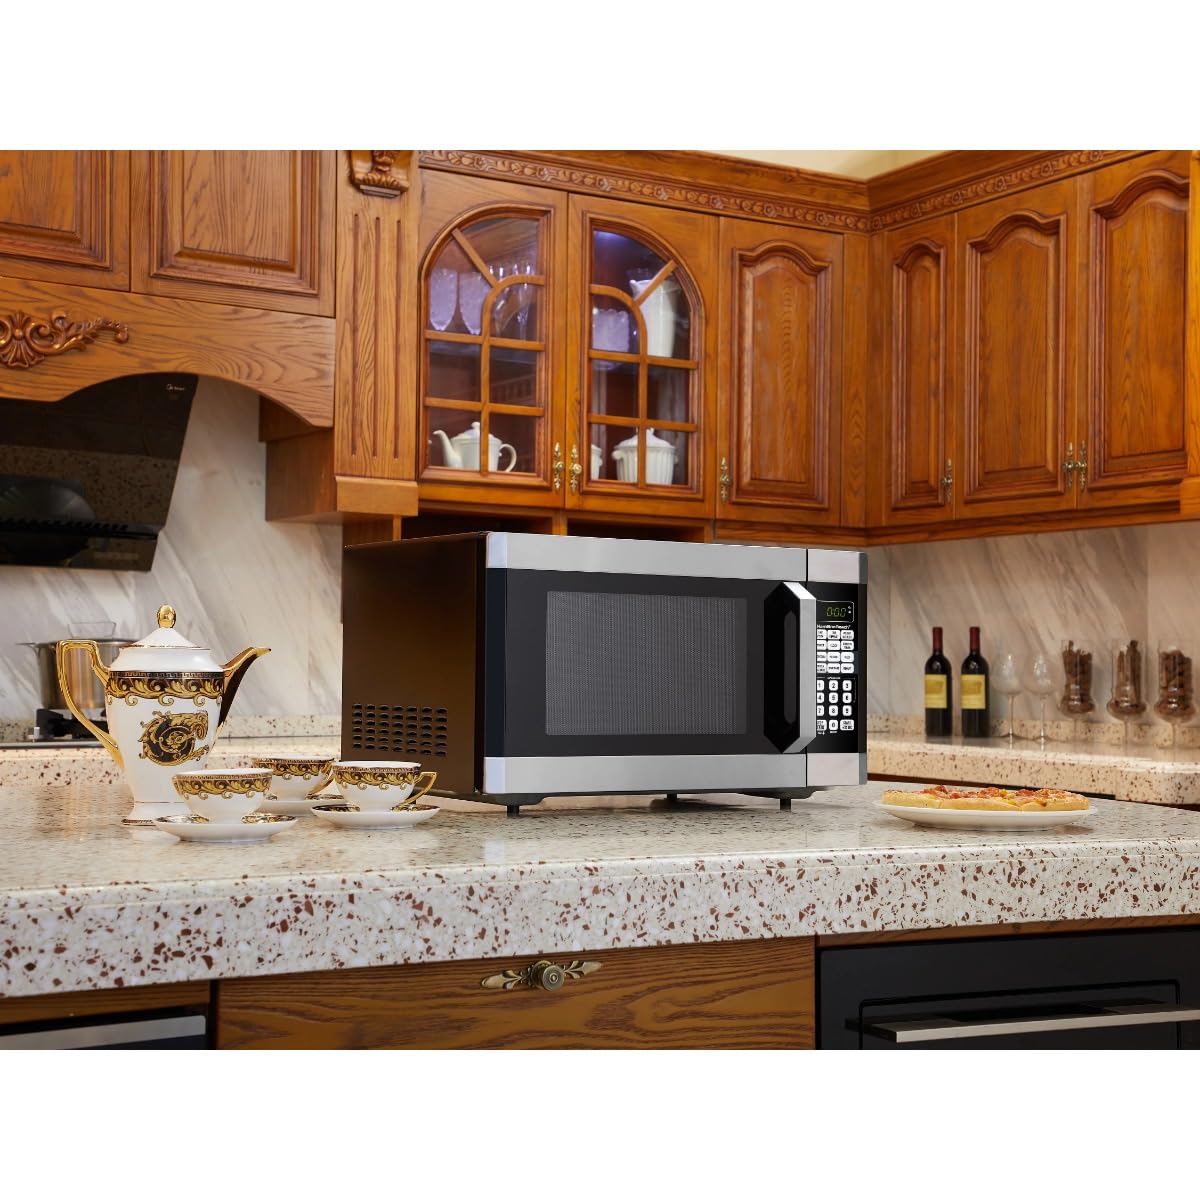 1.6 Cu. ft. Digital Microwave Oven, Stainless Steel